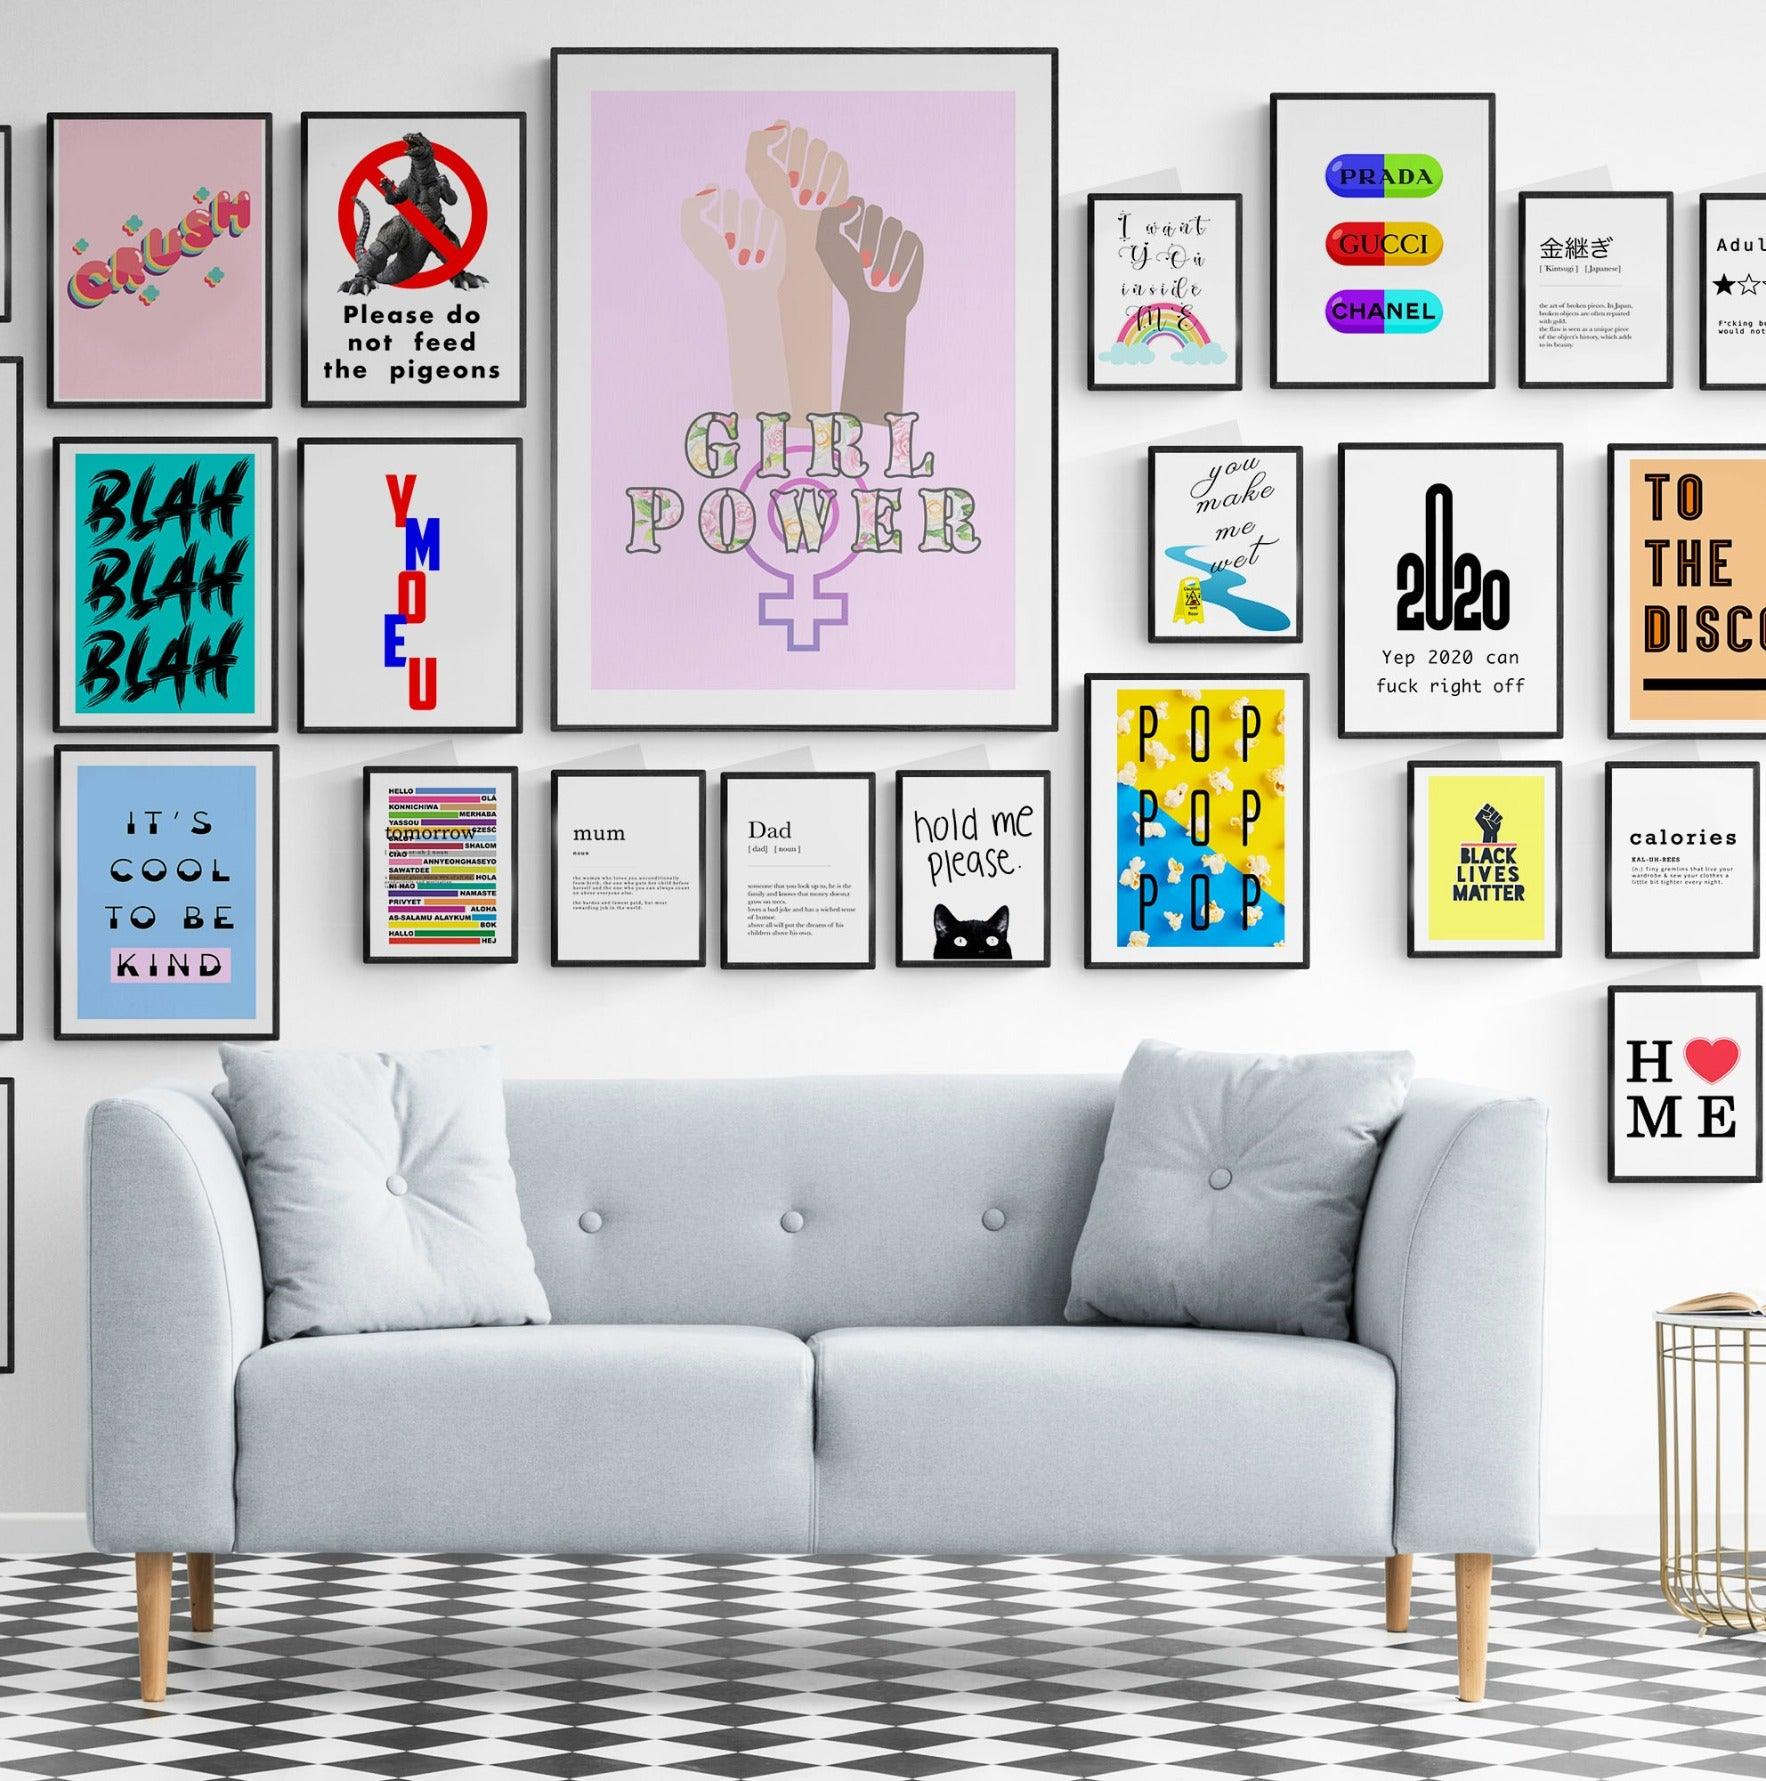 Adulting Would Not Recommend Wall Art Prints - 98types